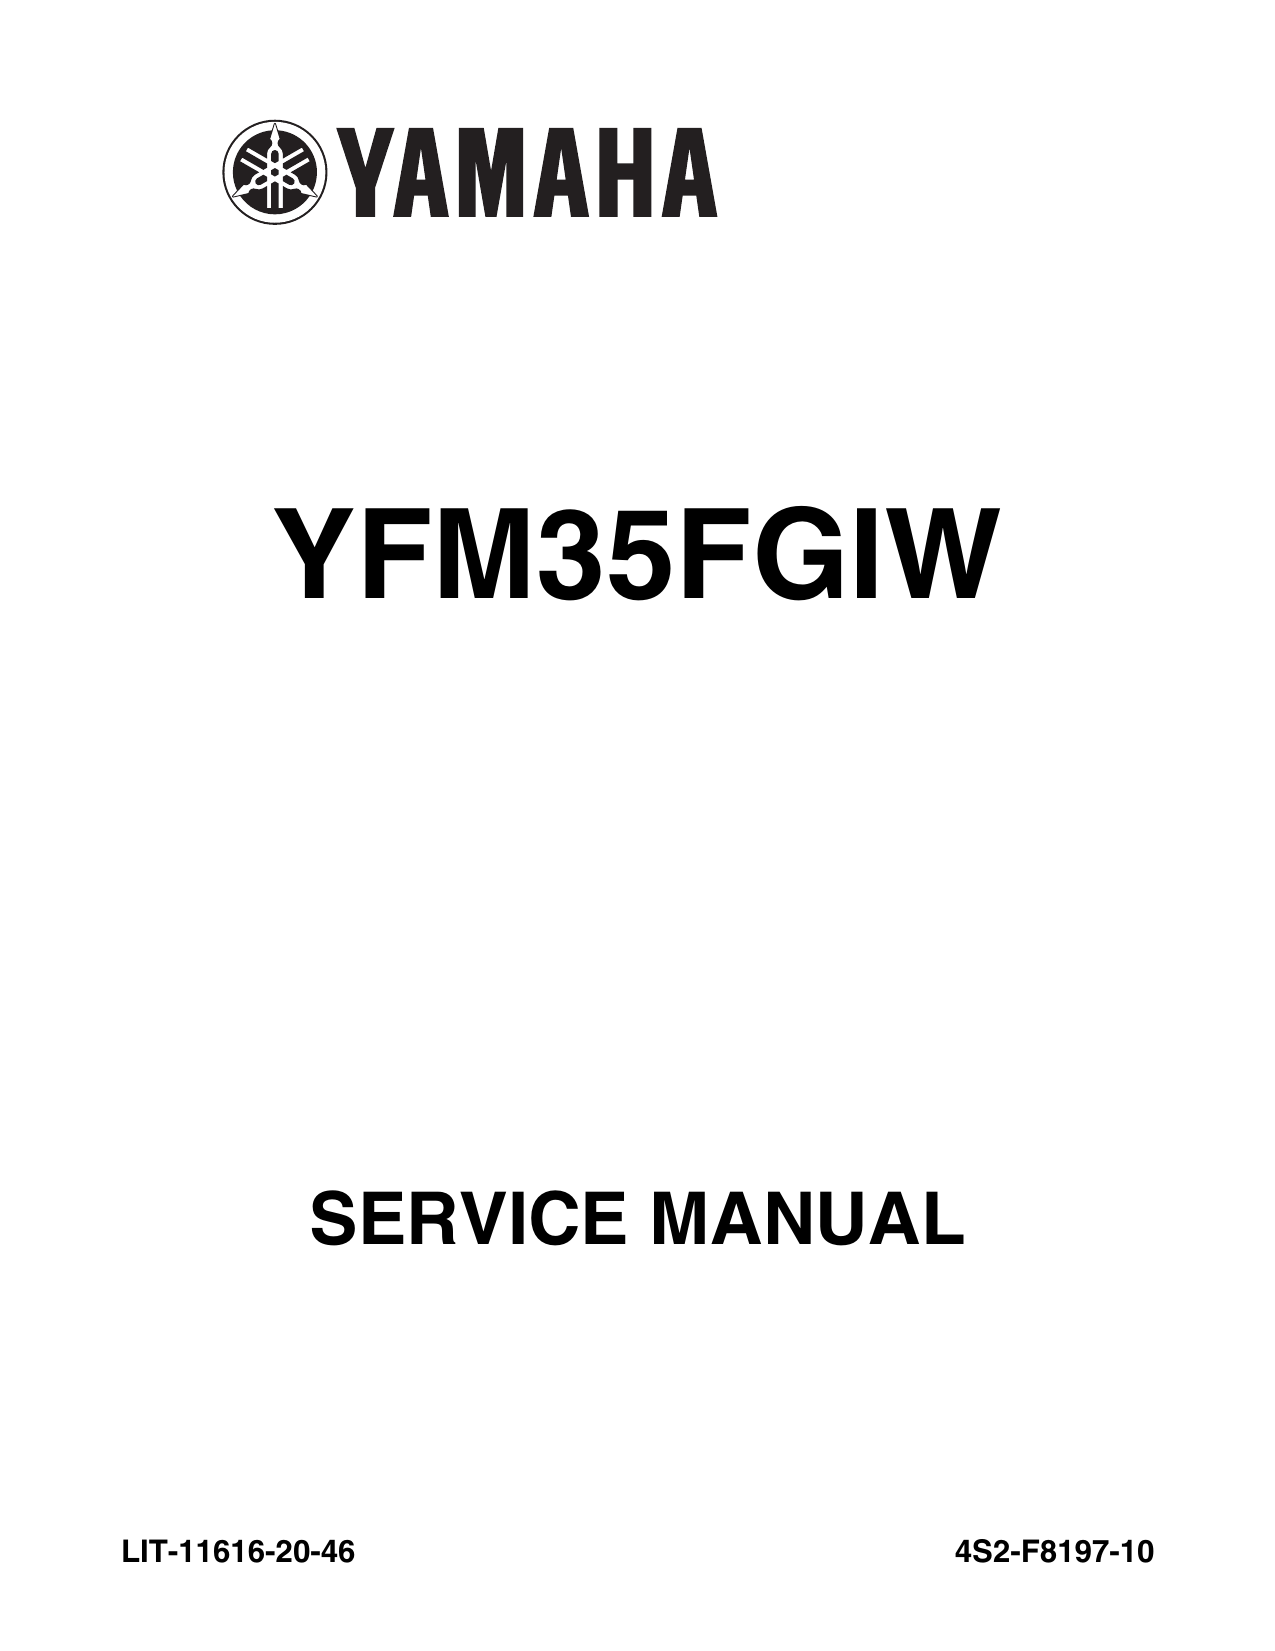 2007-2011 Yamaha Grizzly IRS Auto, YFM 350, 4x4 service manual Preview image 6